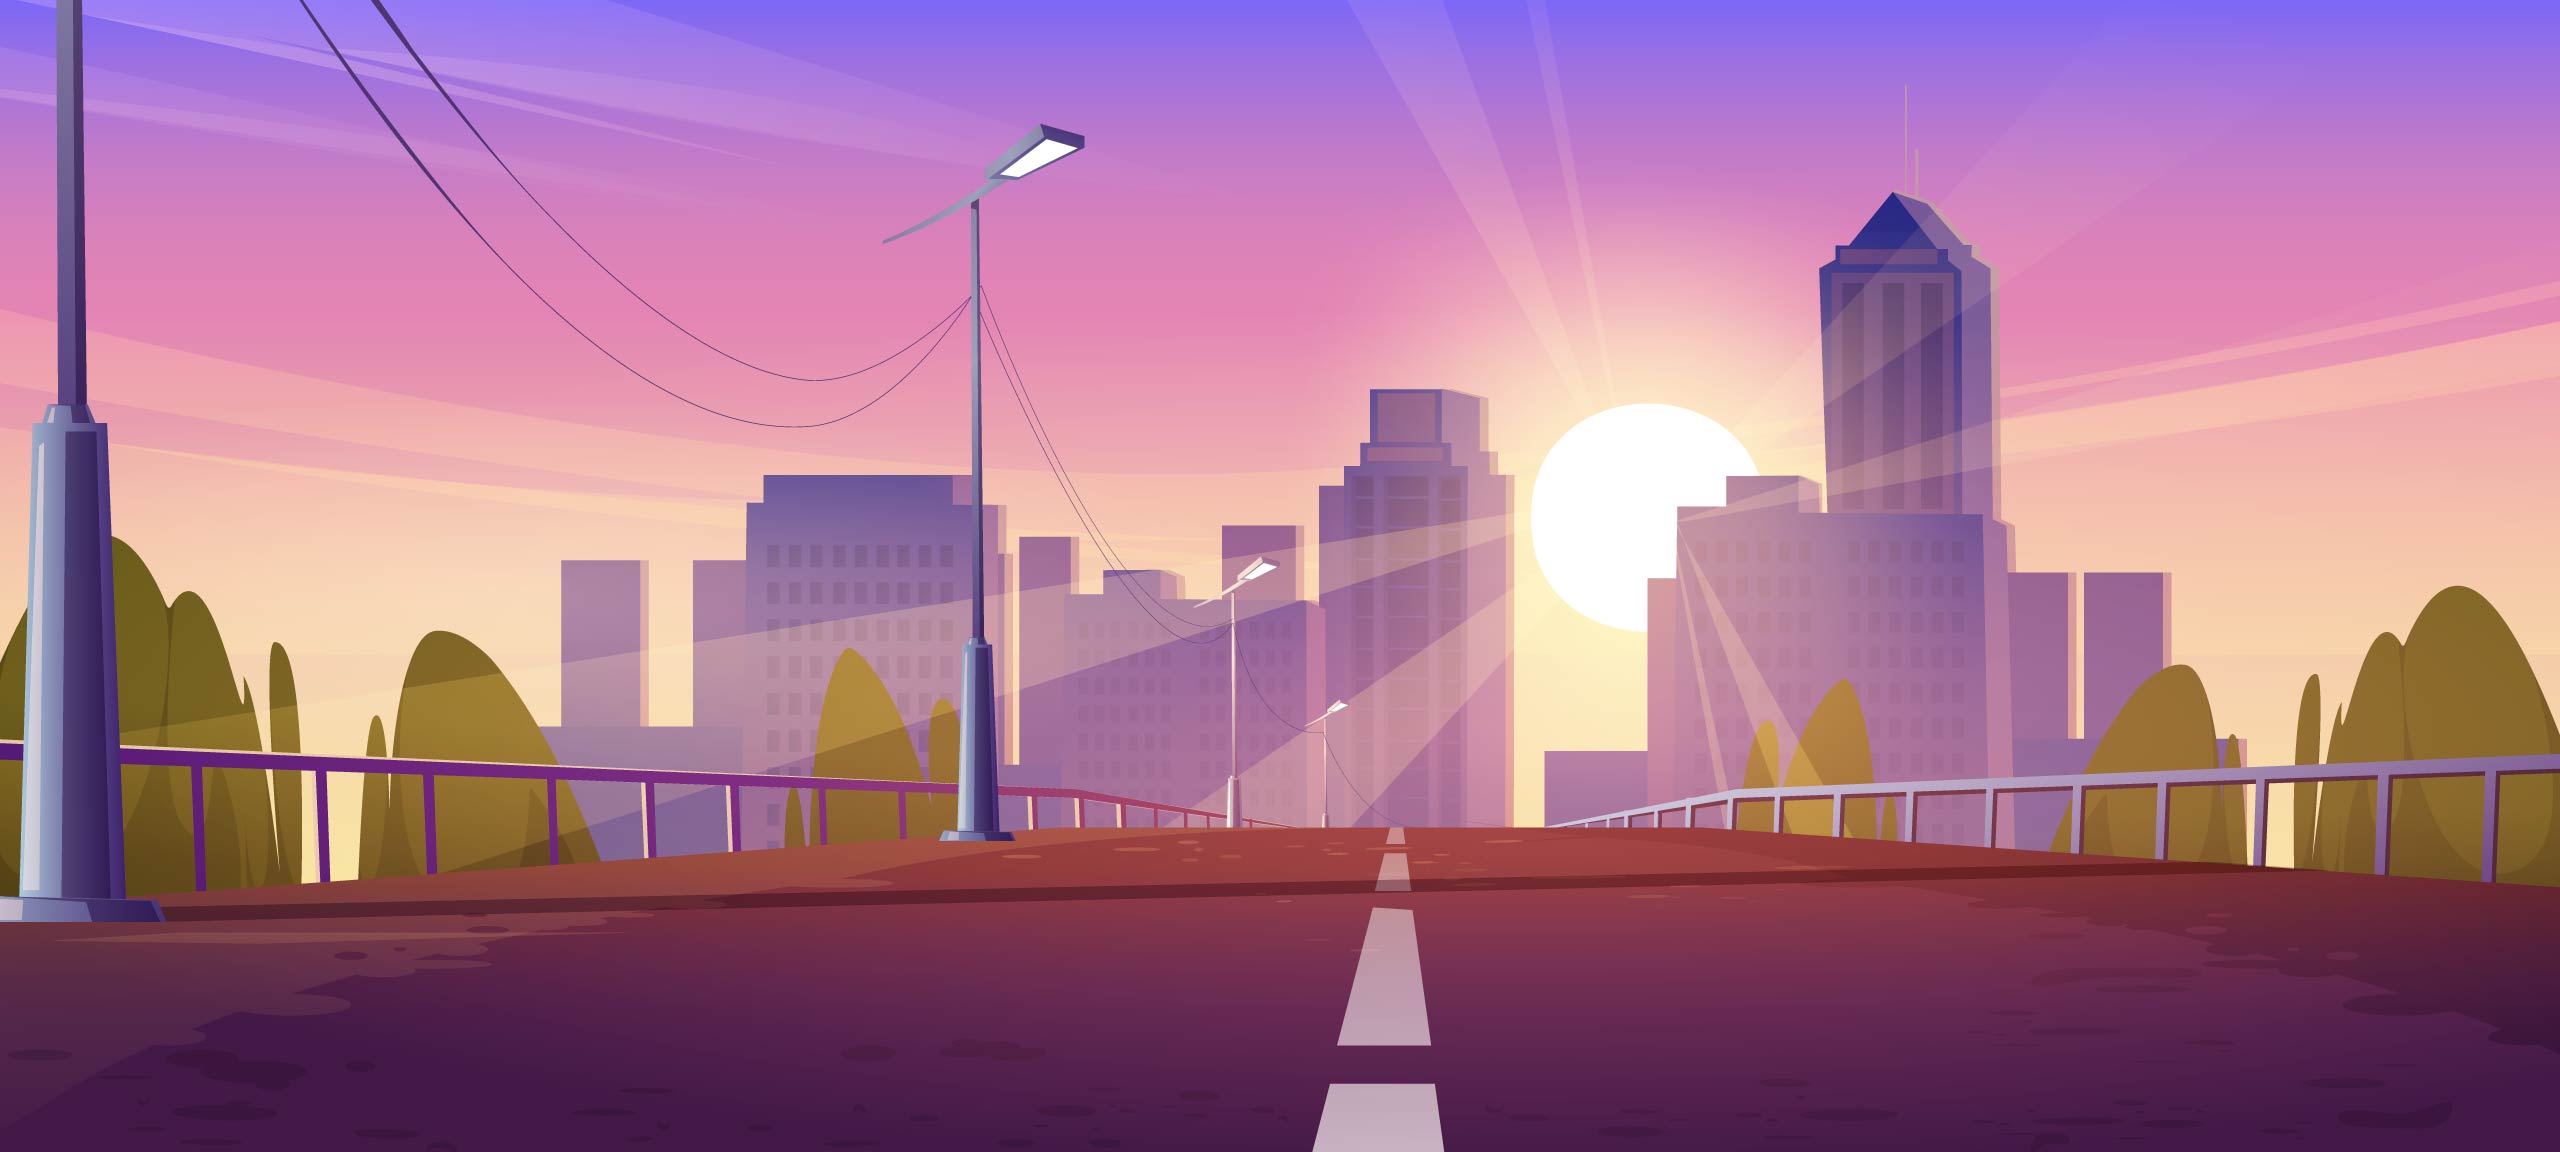 Illustration of a road with a view of the cityscape in the background at sunset